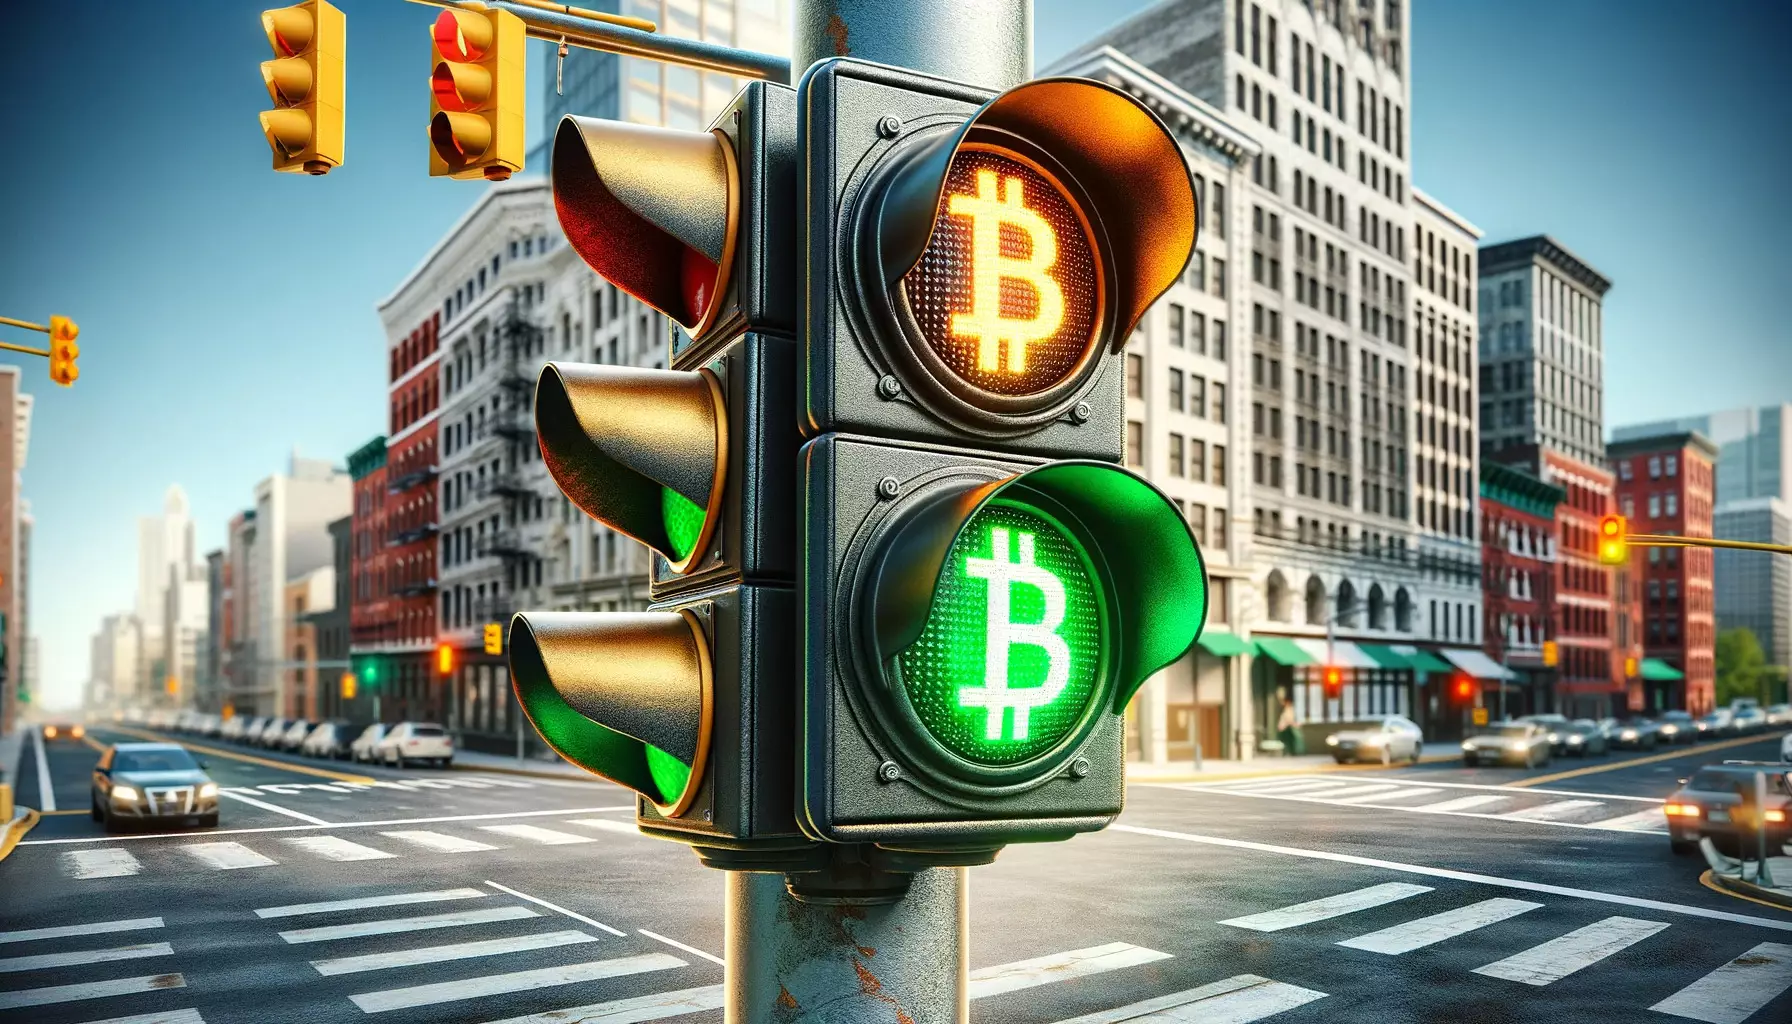 Spot Bitcoin ETF Approvals: A Delayed Timeline and the Final Stages